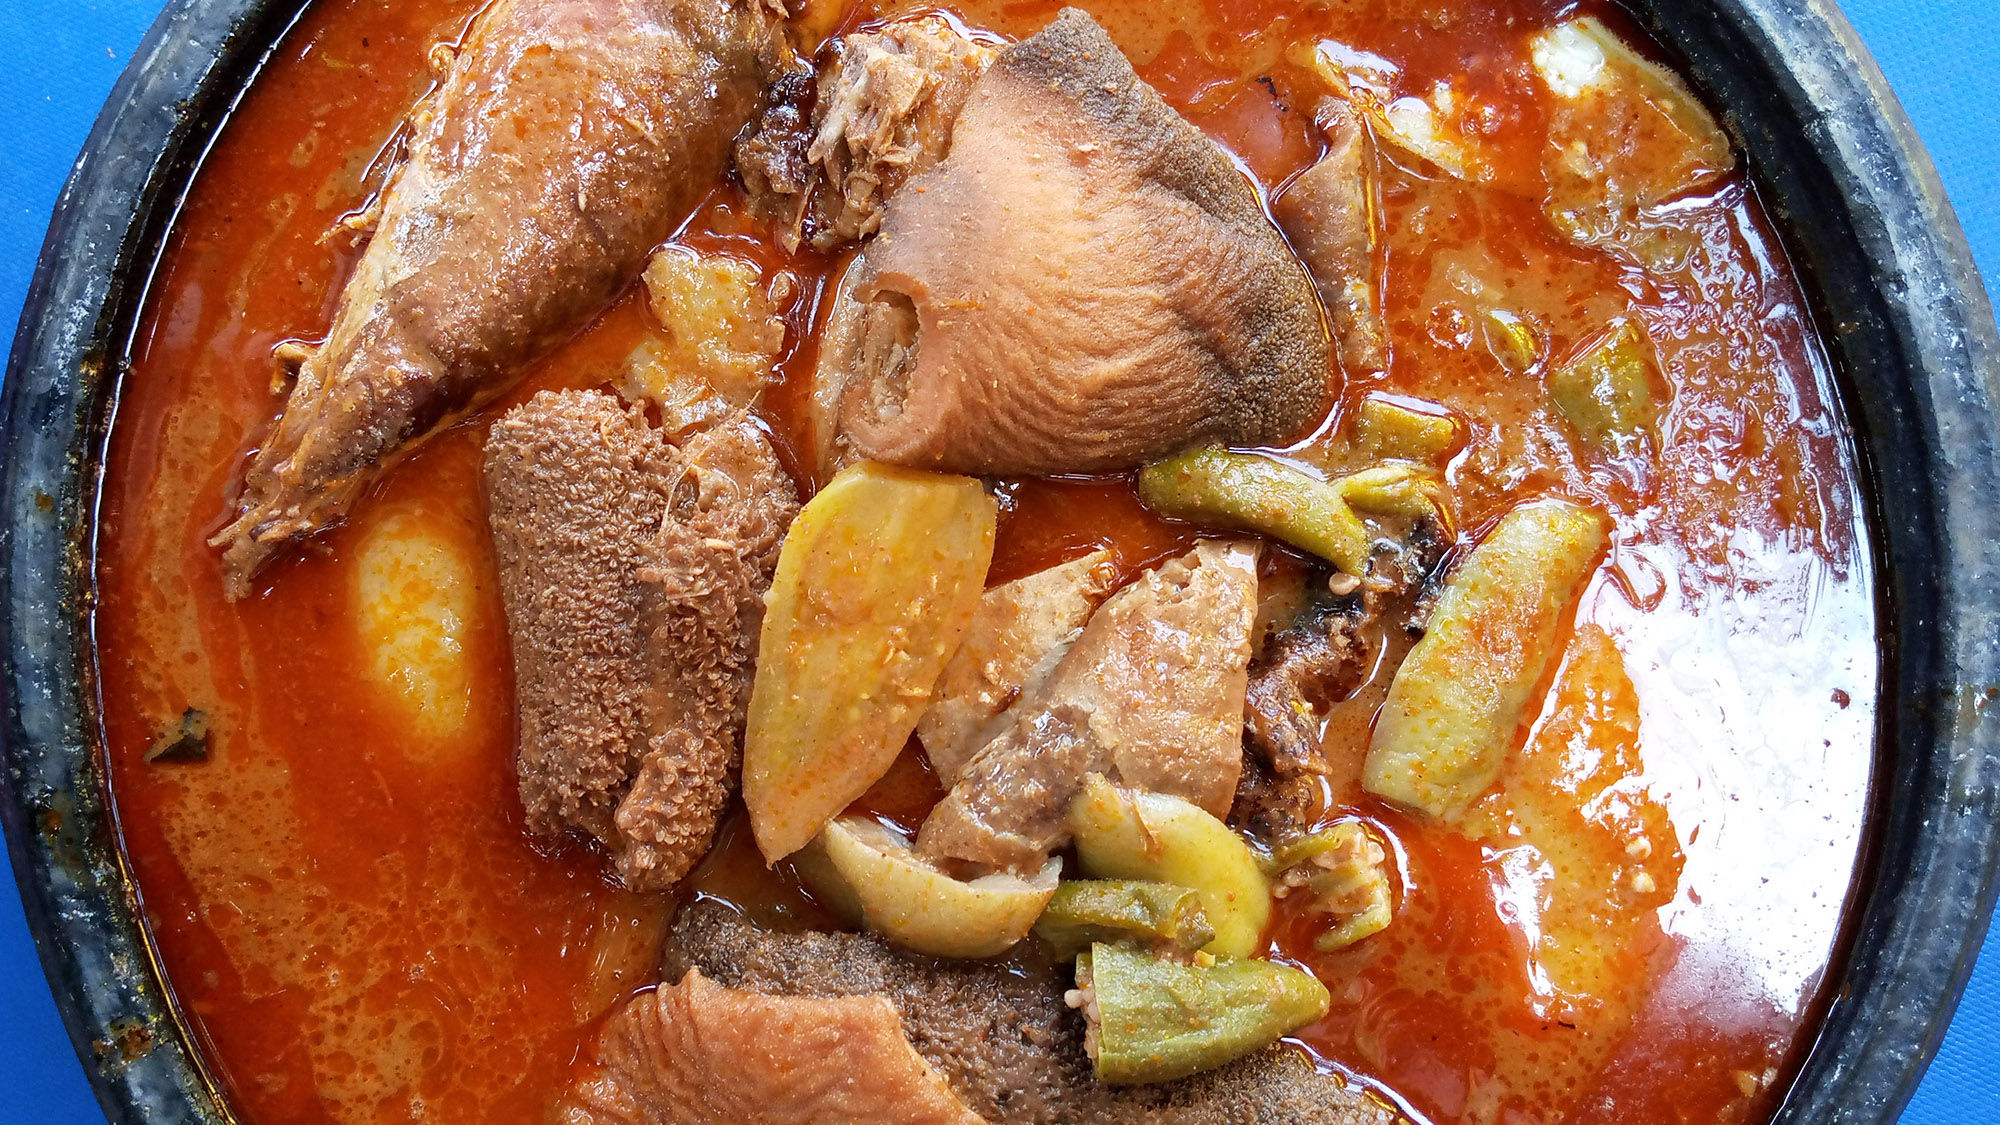 Fufu is a popular dish from Ghana's Ashanti region made from boiled starchy roots such as yams and served with soups and stews.